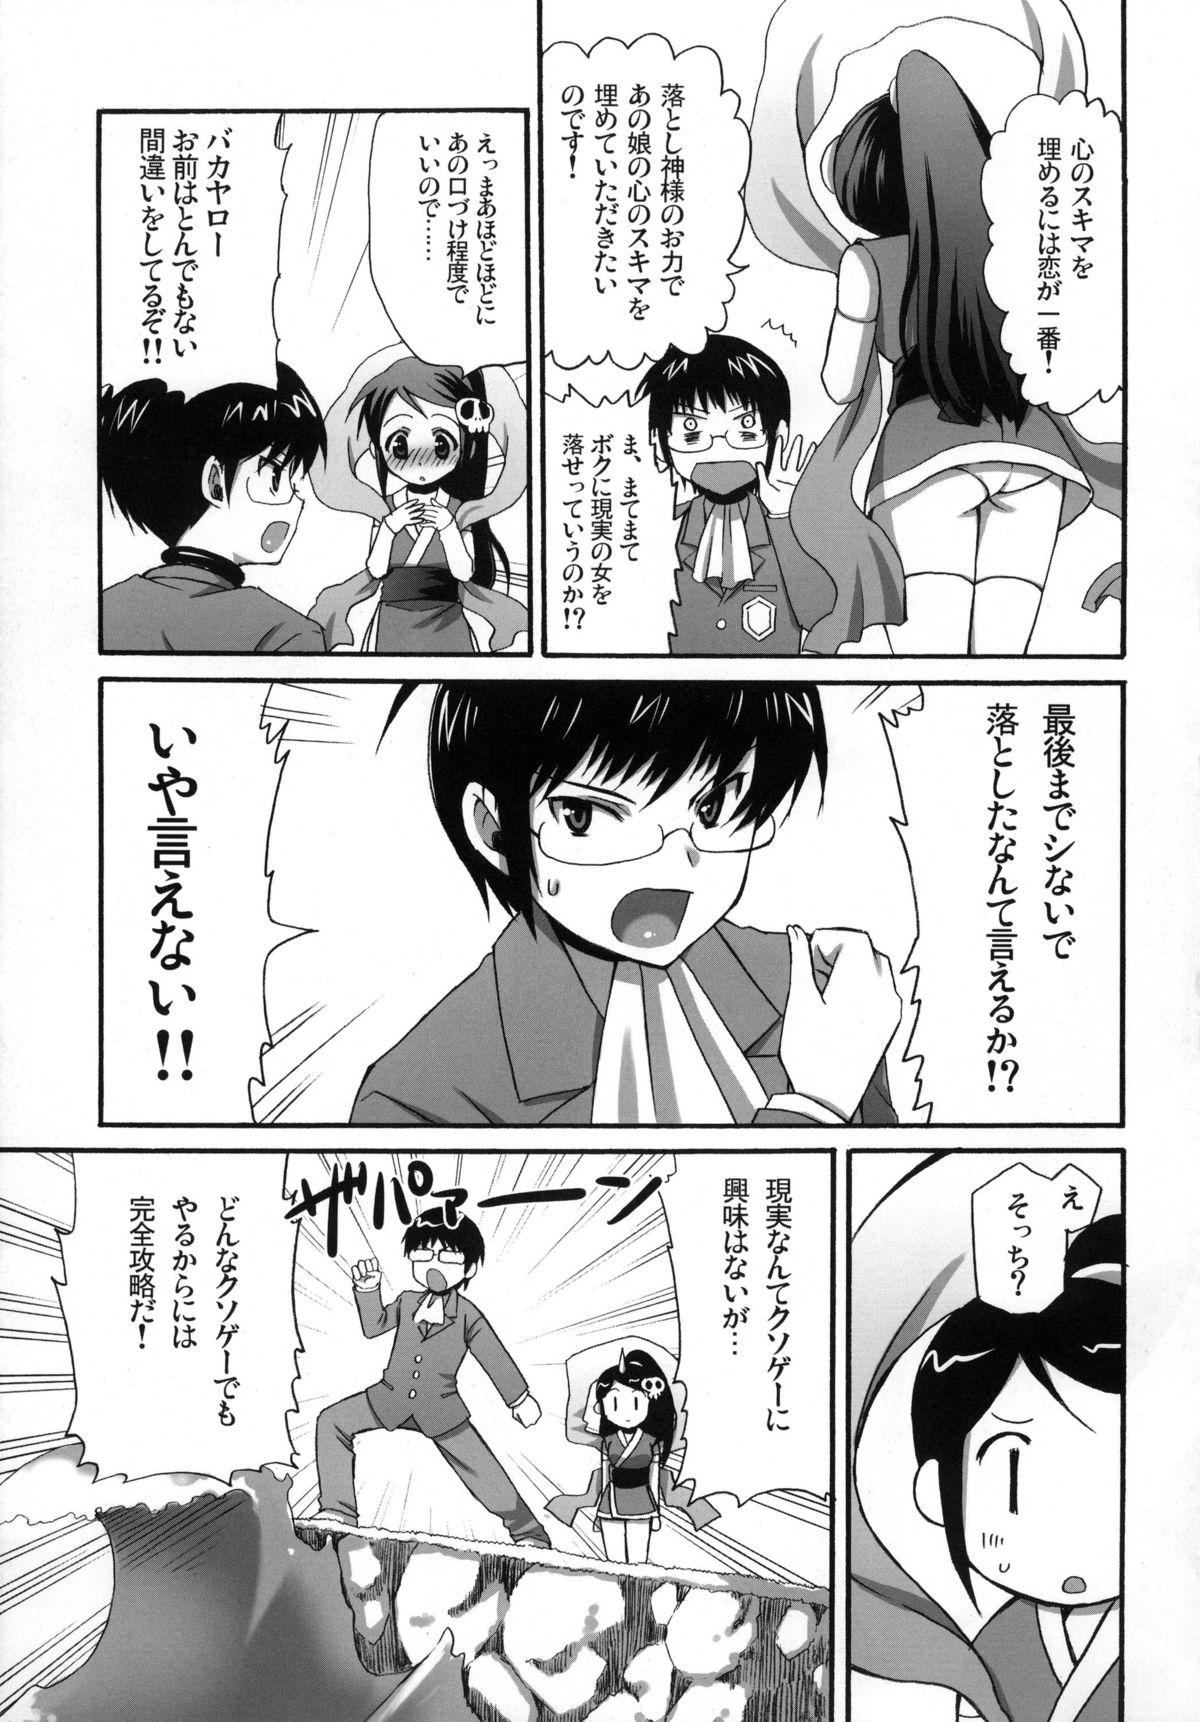 Pale Kami Nomi zo Fullcomp - The world god only knows Morena - Page 5